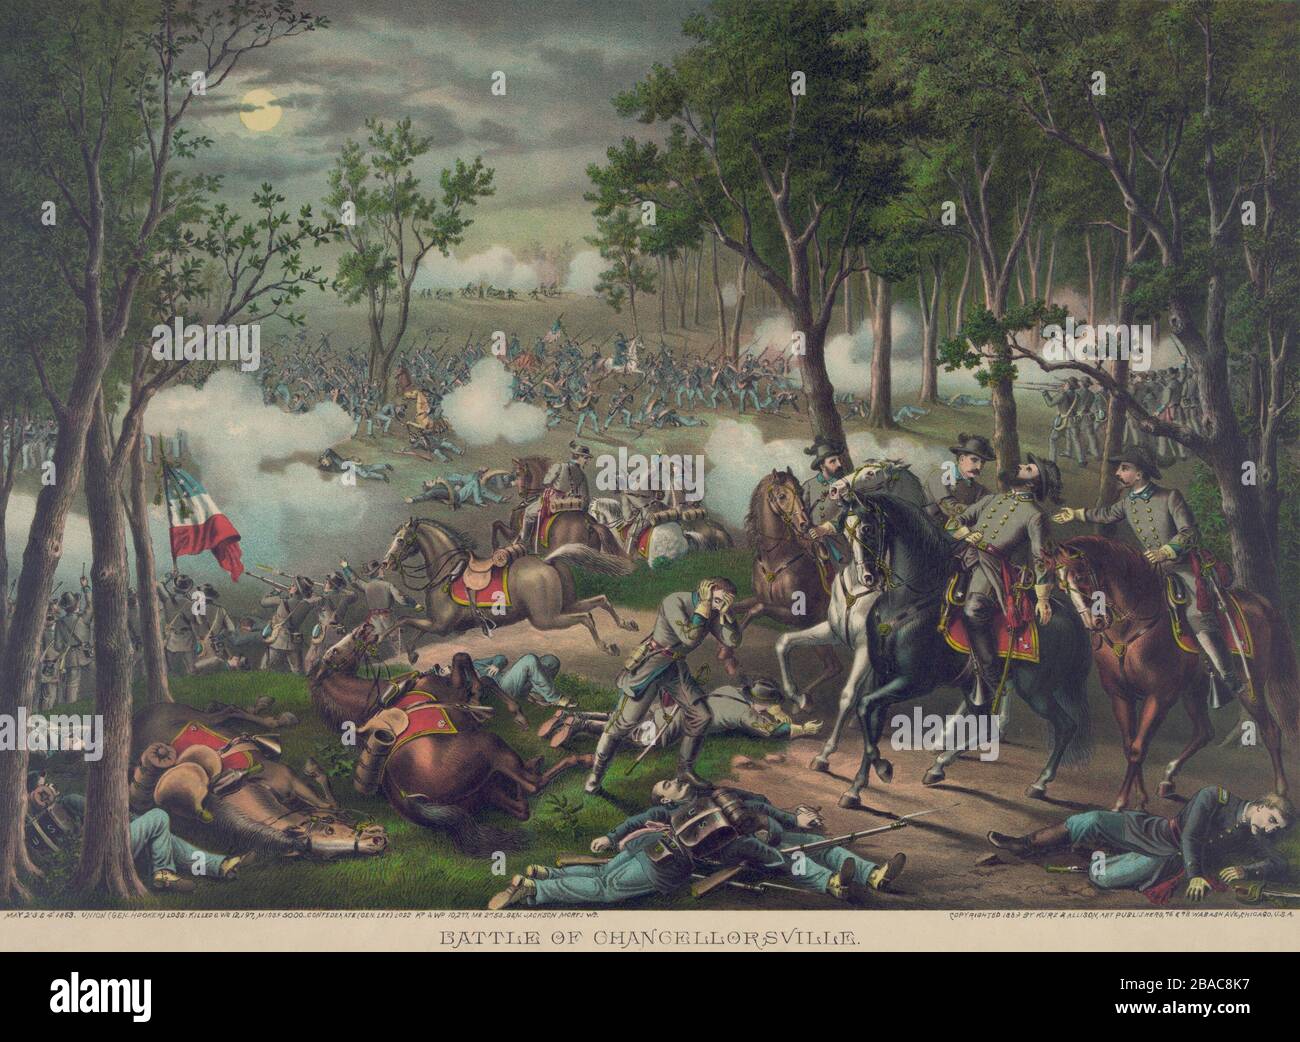 US Civil War, Battle of Chancellorsville, Virginia, April 2, 1863. Print shows two non-contemporaneous scenes from the Battle of Chancellorsville, May 2-3, 1863. The armies in combat would have occurred hours before Thomas 'Stonewall Jackson' was shot in the evening of May 2nd, when Confederate guards mistook the General's escort for a detachment of Union troops. General Jackson was wounded in the upper left arm, while riding with his staff, two of whom are shown coming to his aid, perhaps Robert E. Rodes and A.P. Hill.  (BSLOC 2018 8 129) Stock Photo